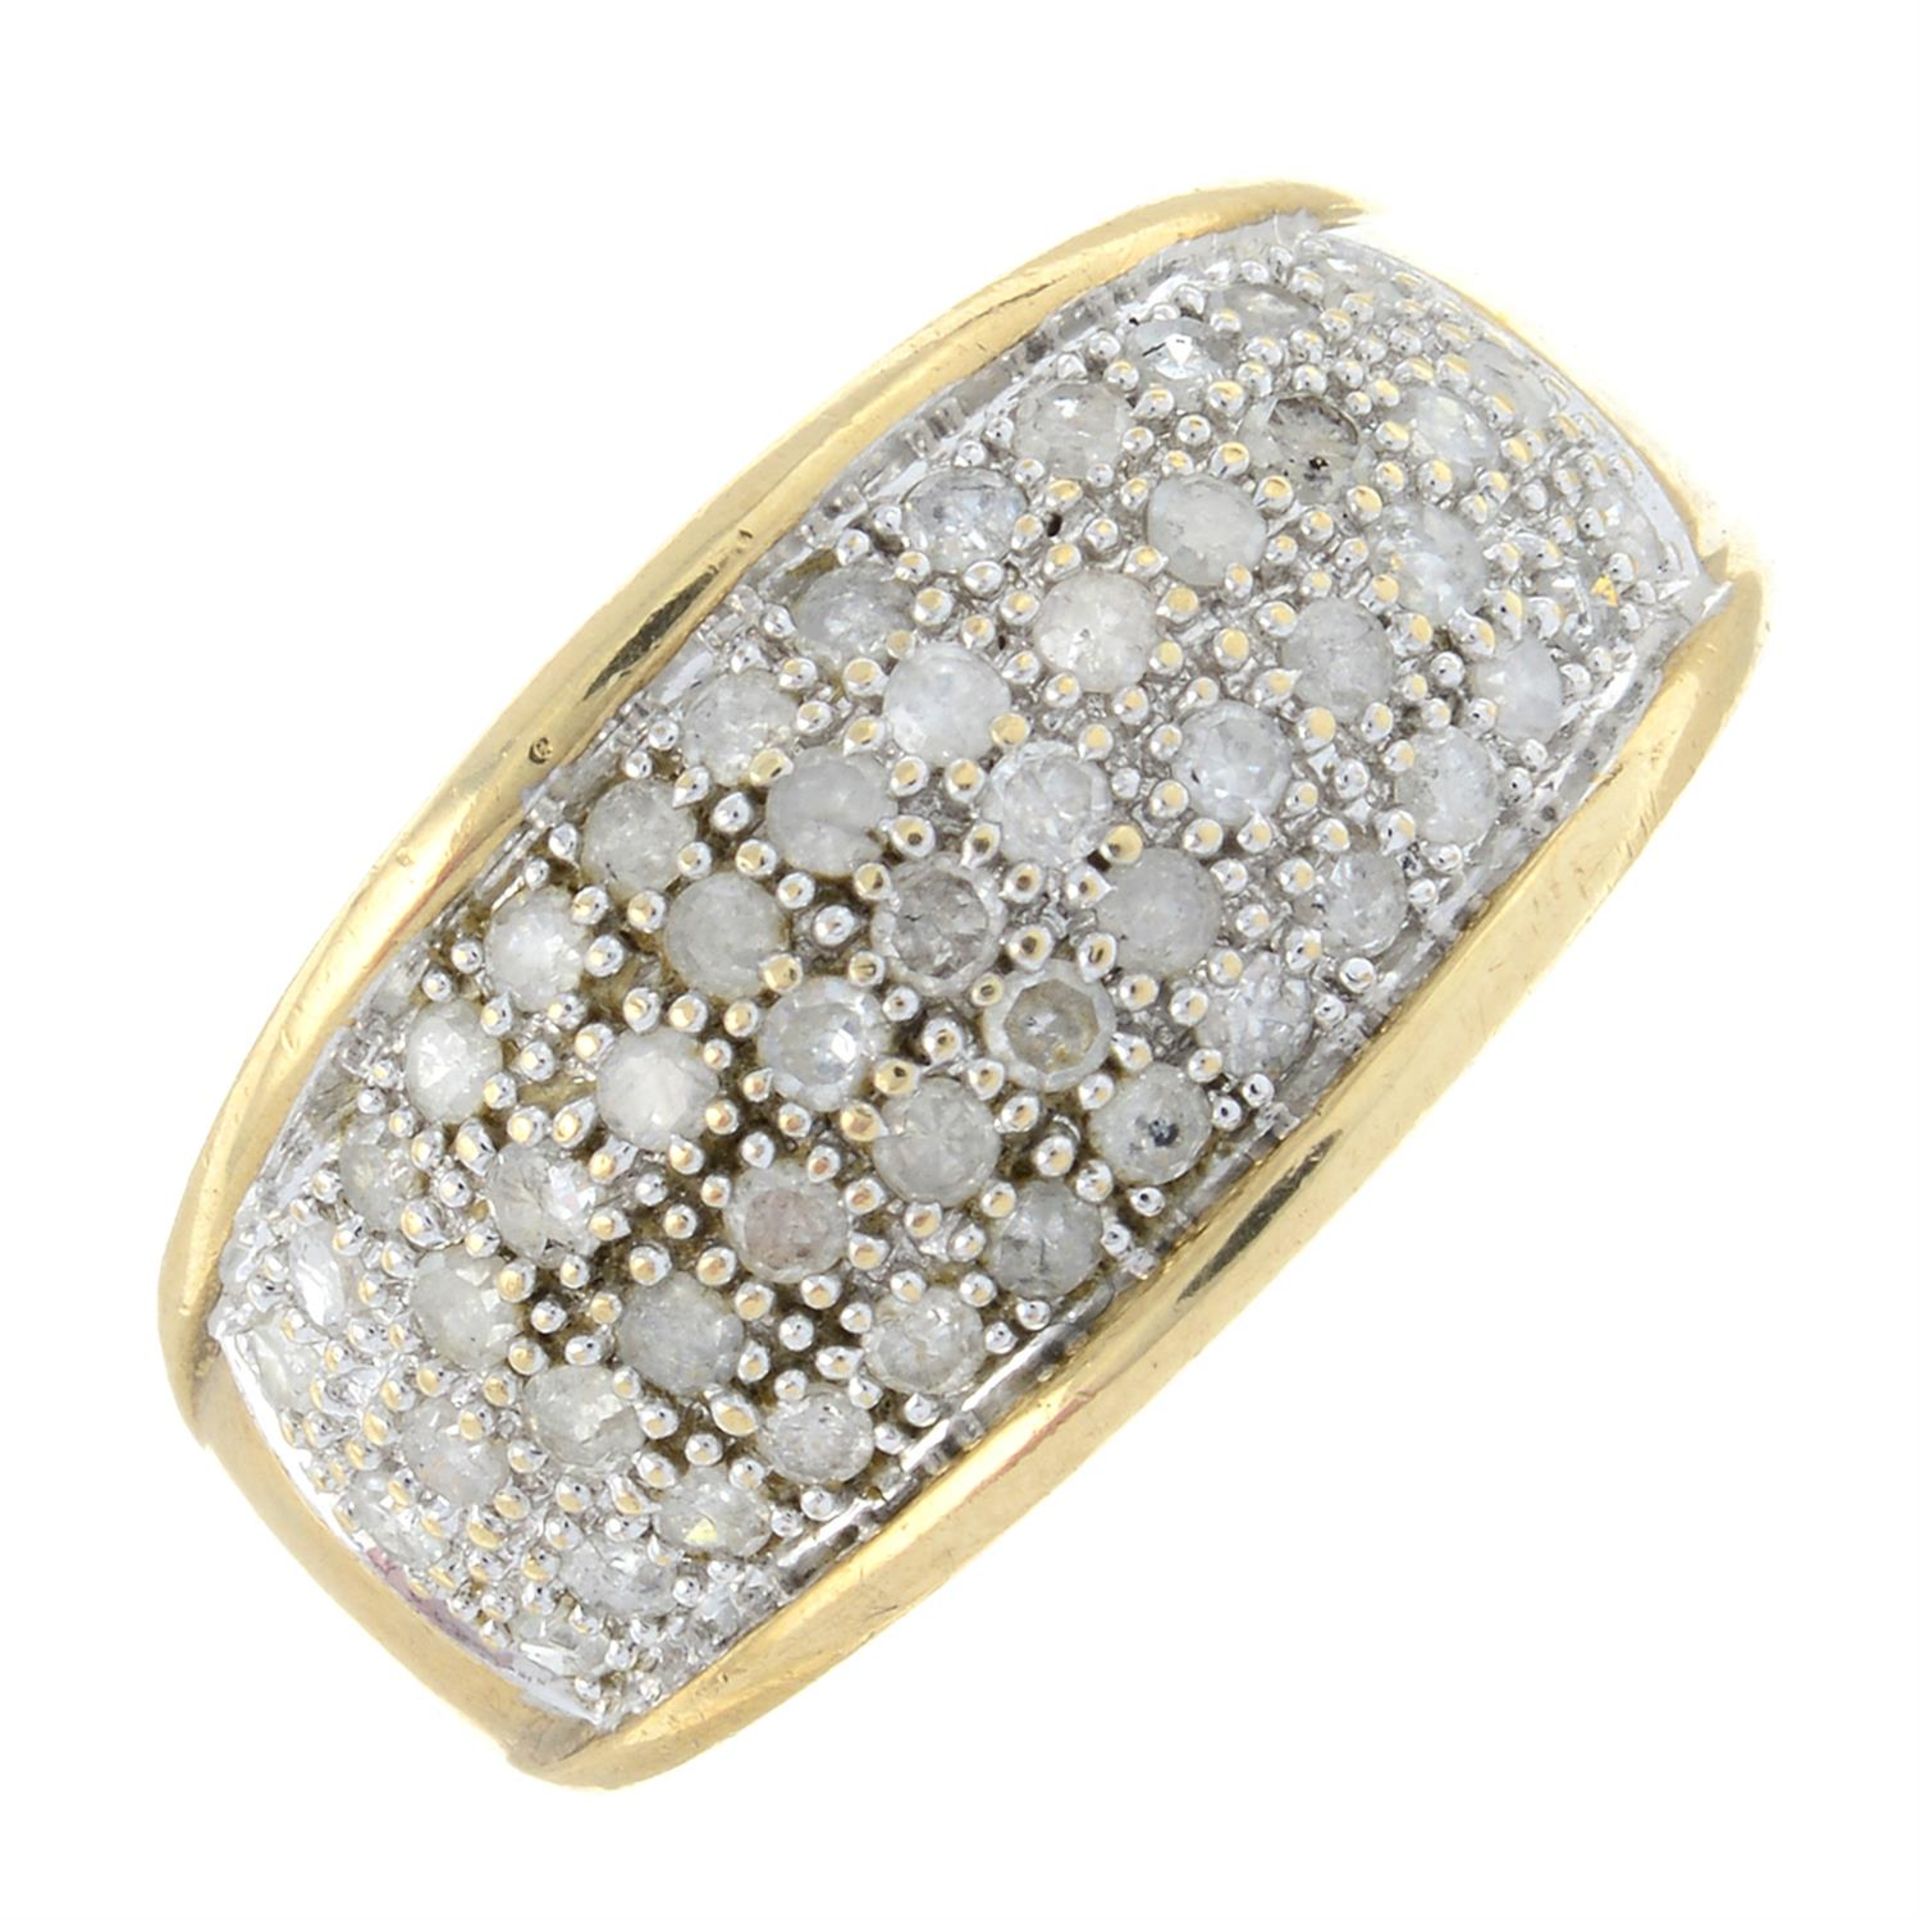 A 9ct gold old-cut diamond bombe ring.